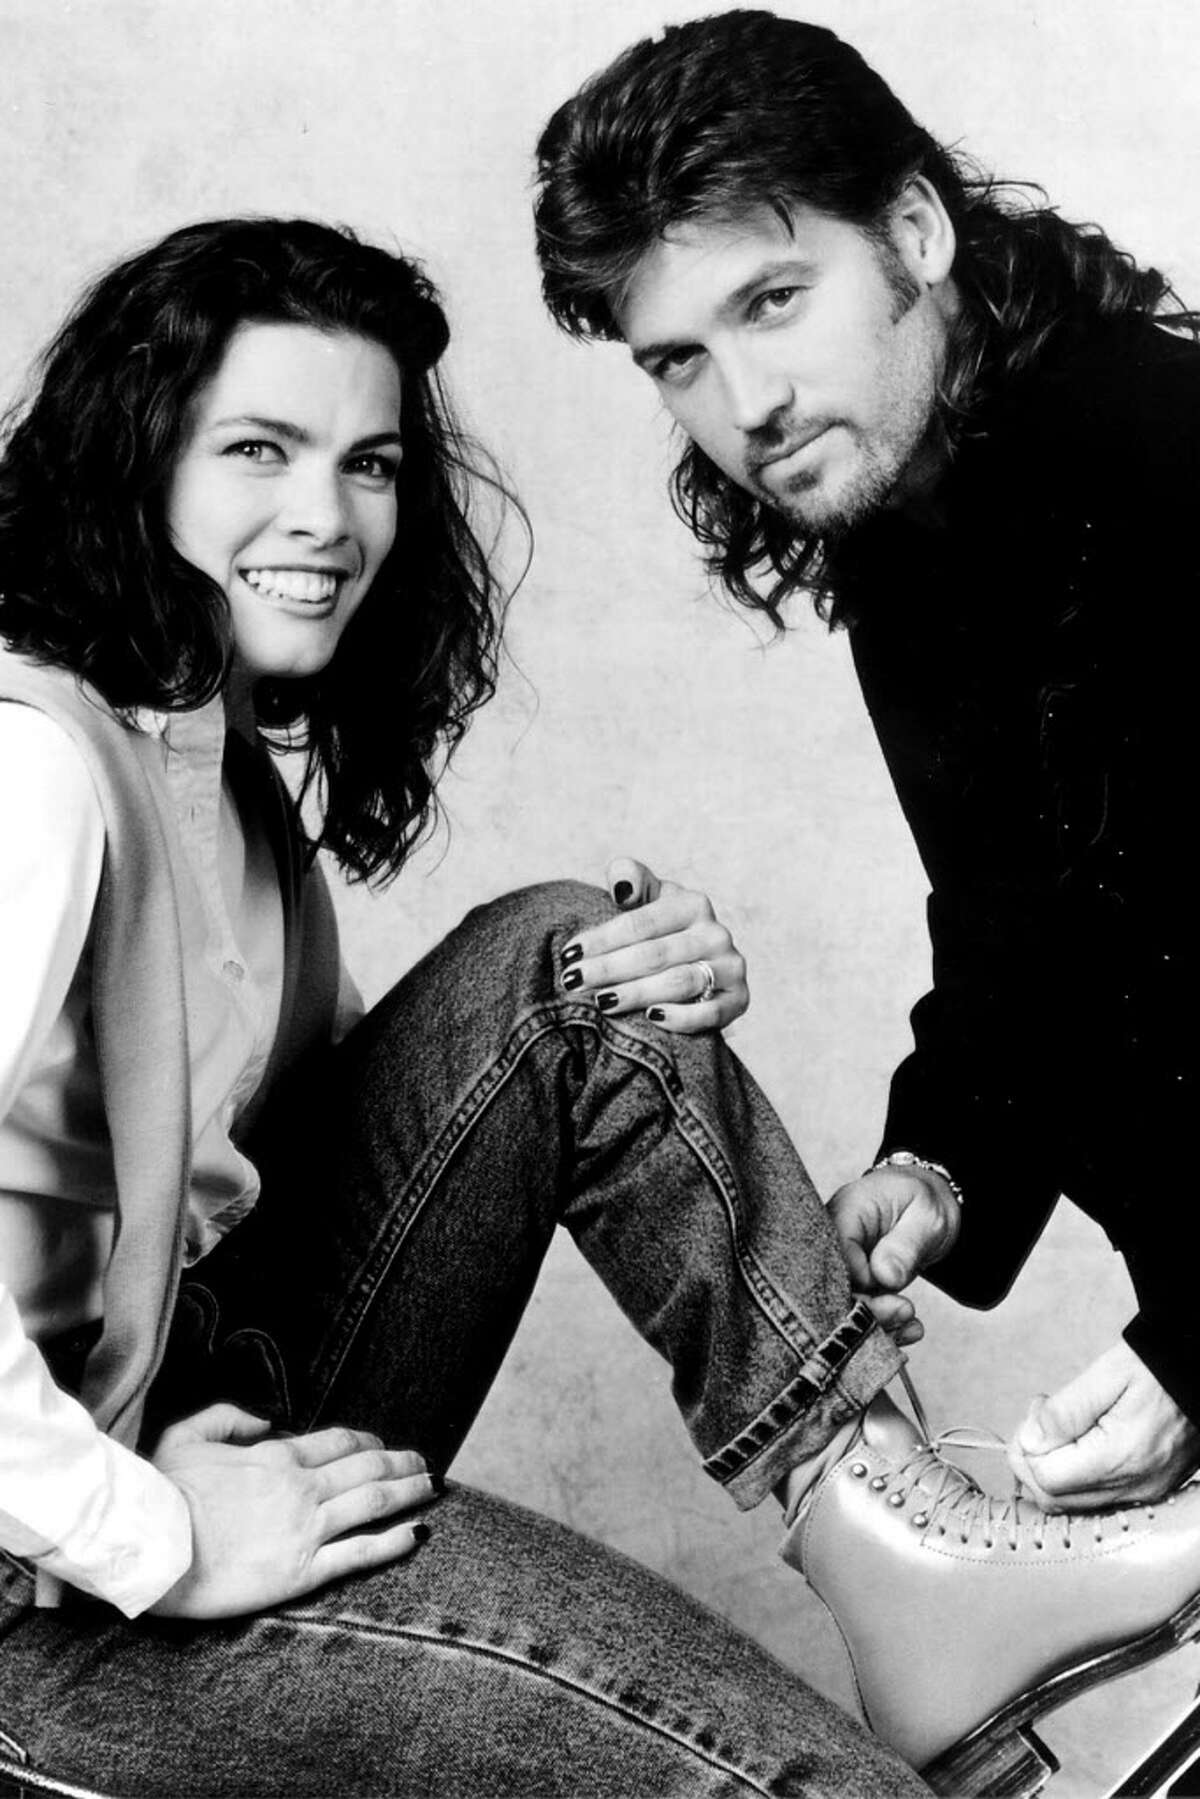 In 1999, Nancy Kerrigan skated to the music of Billy Ray Cyrus and others on the new TNN special "Holiday Celebration on Ice."